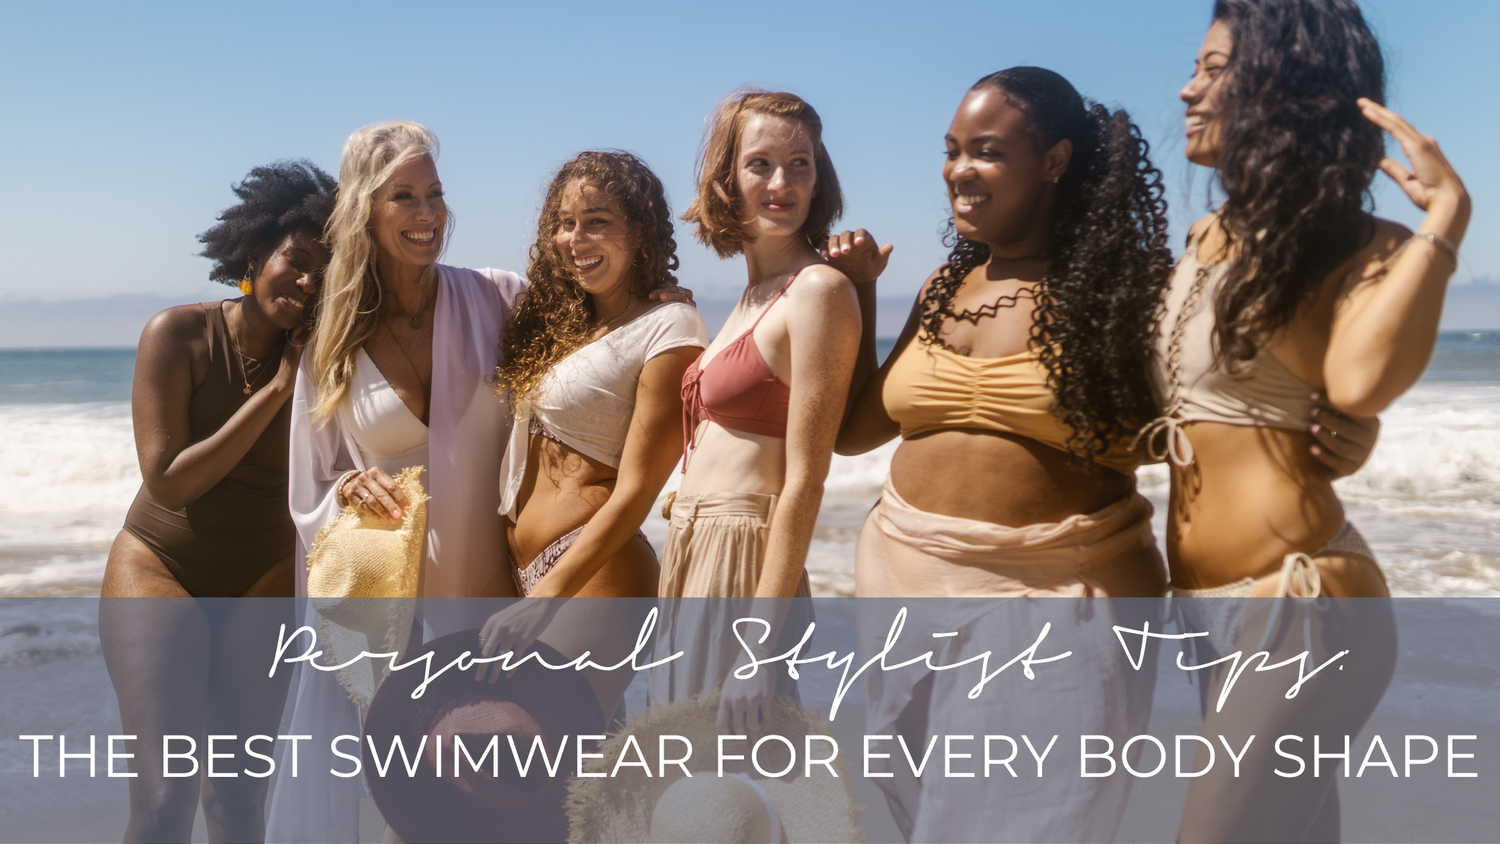 THE BEST SWIMWEAR FOR YOUR BODY TYPE - PERSONAL STYLIST TIPS - One